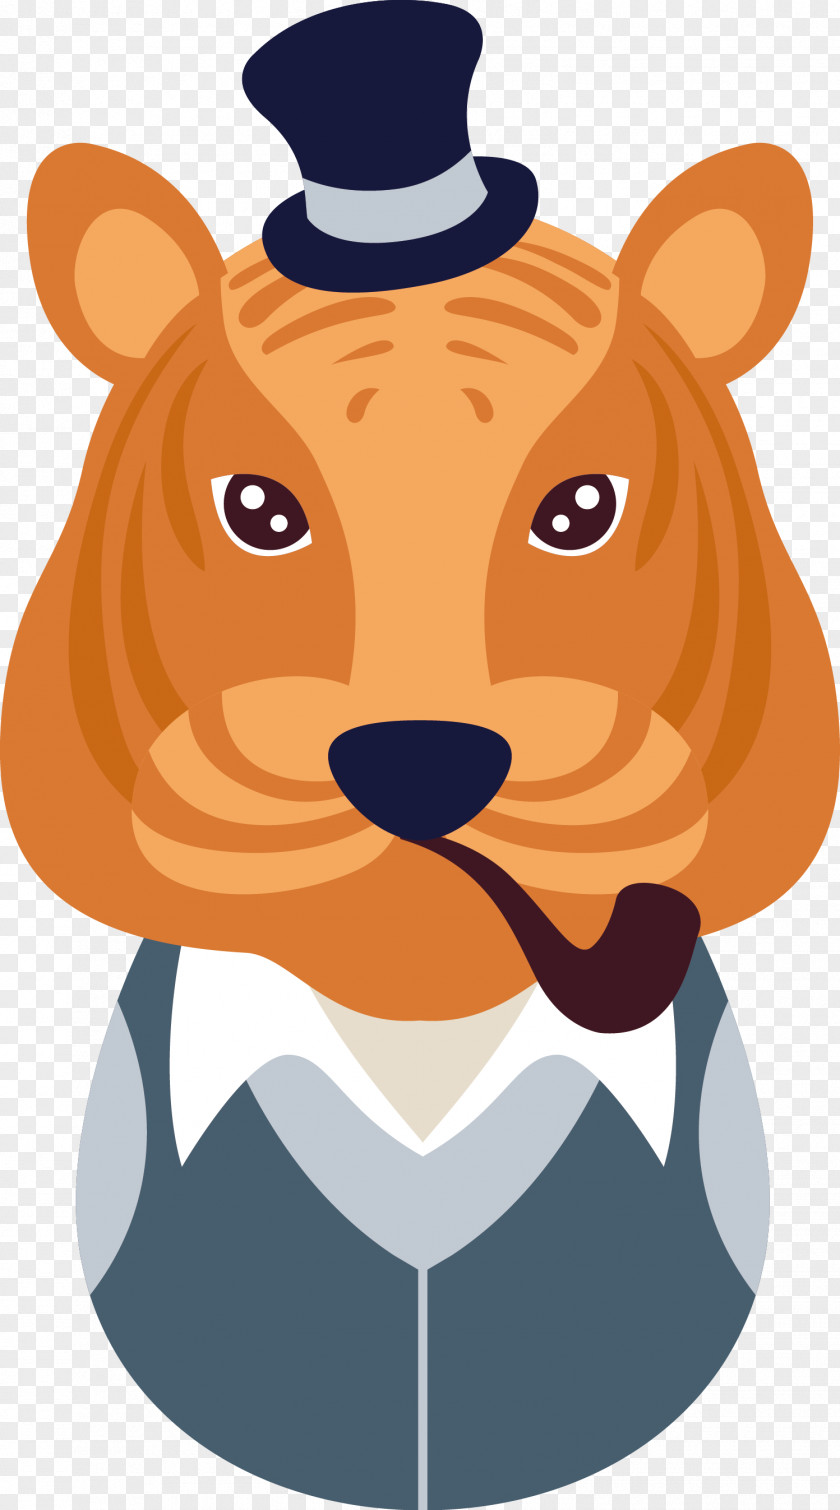 Creative Puppy Vector Tiger Whiskers Dog Illustration PNG